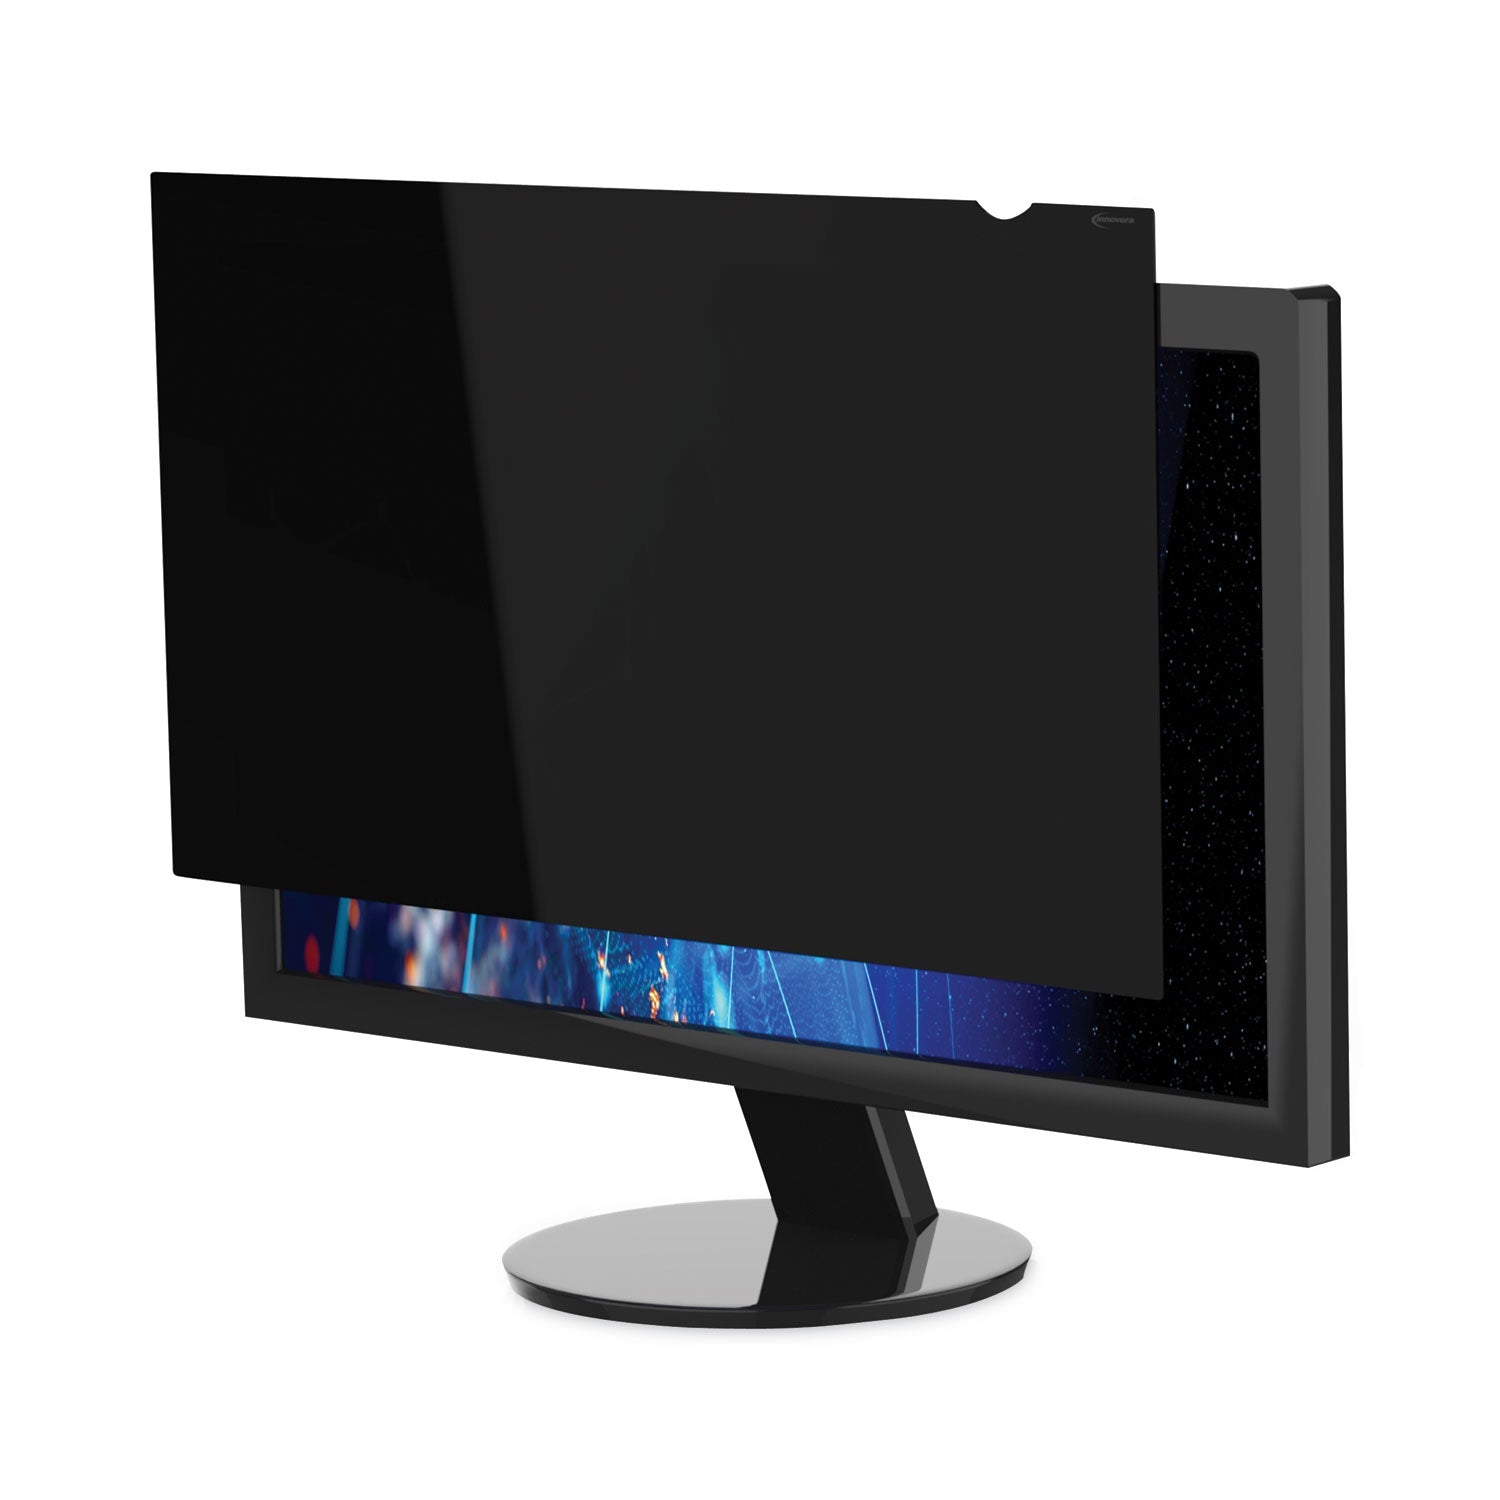 blackout-privacy-monitor-filter-for-236-widescreen-flat-panel-monitor-169-aspect-ratio_ivrblf236w - 3